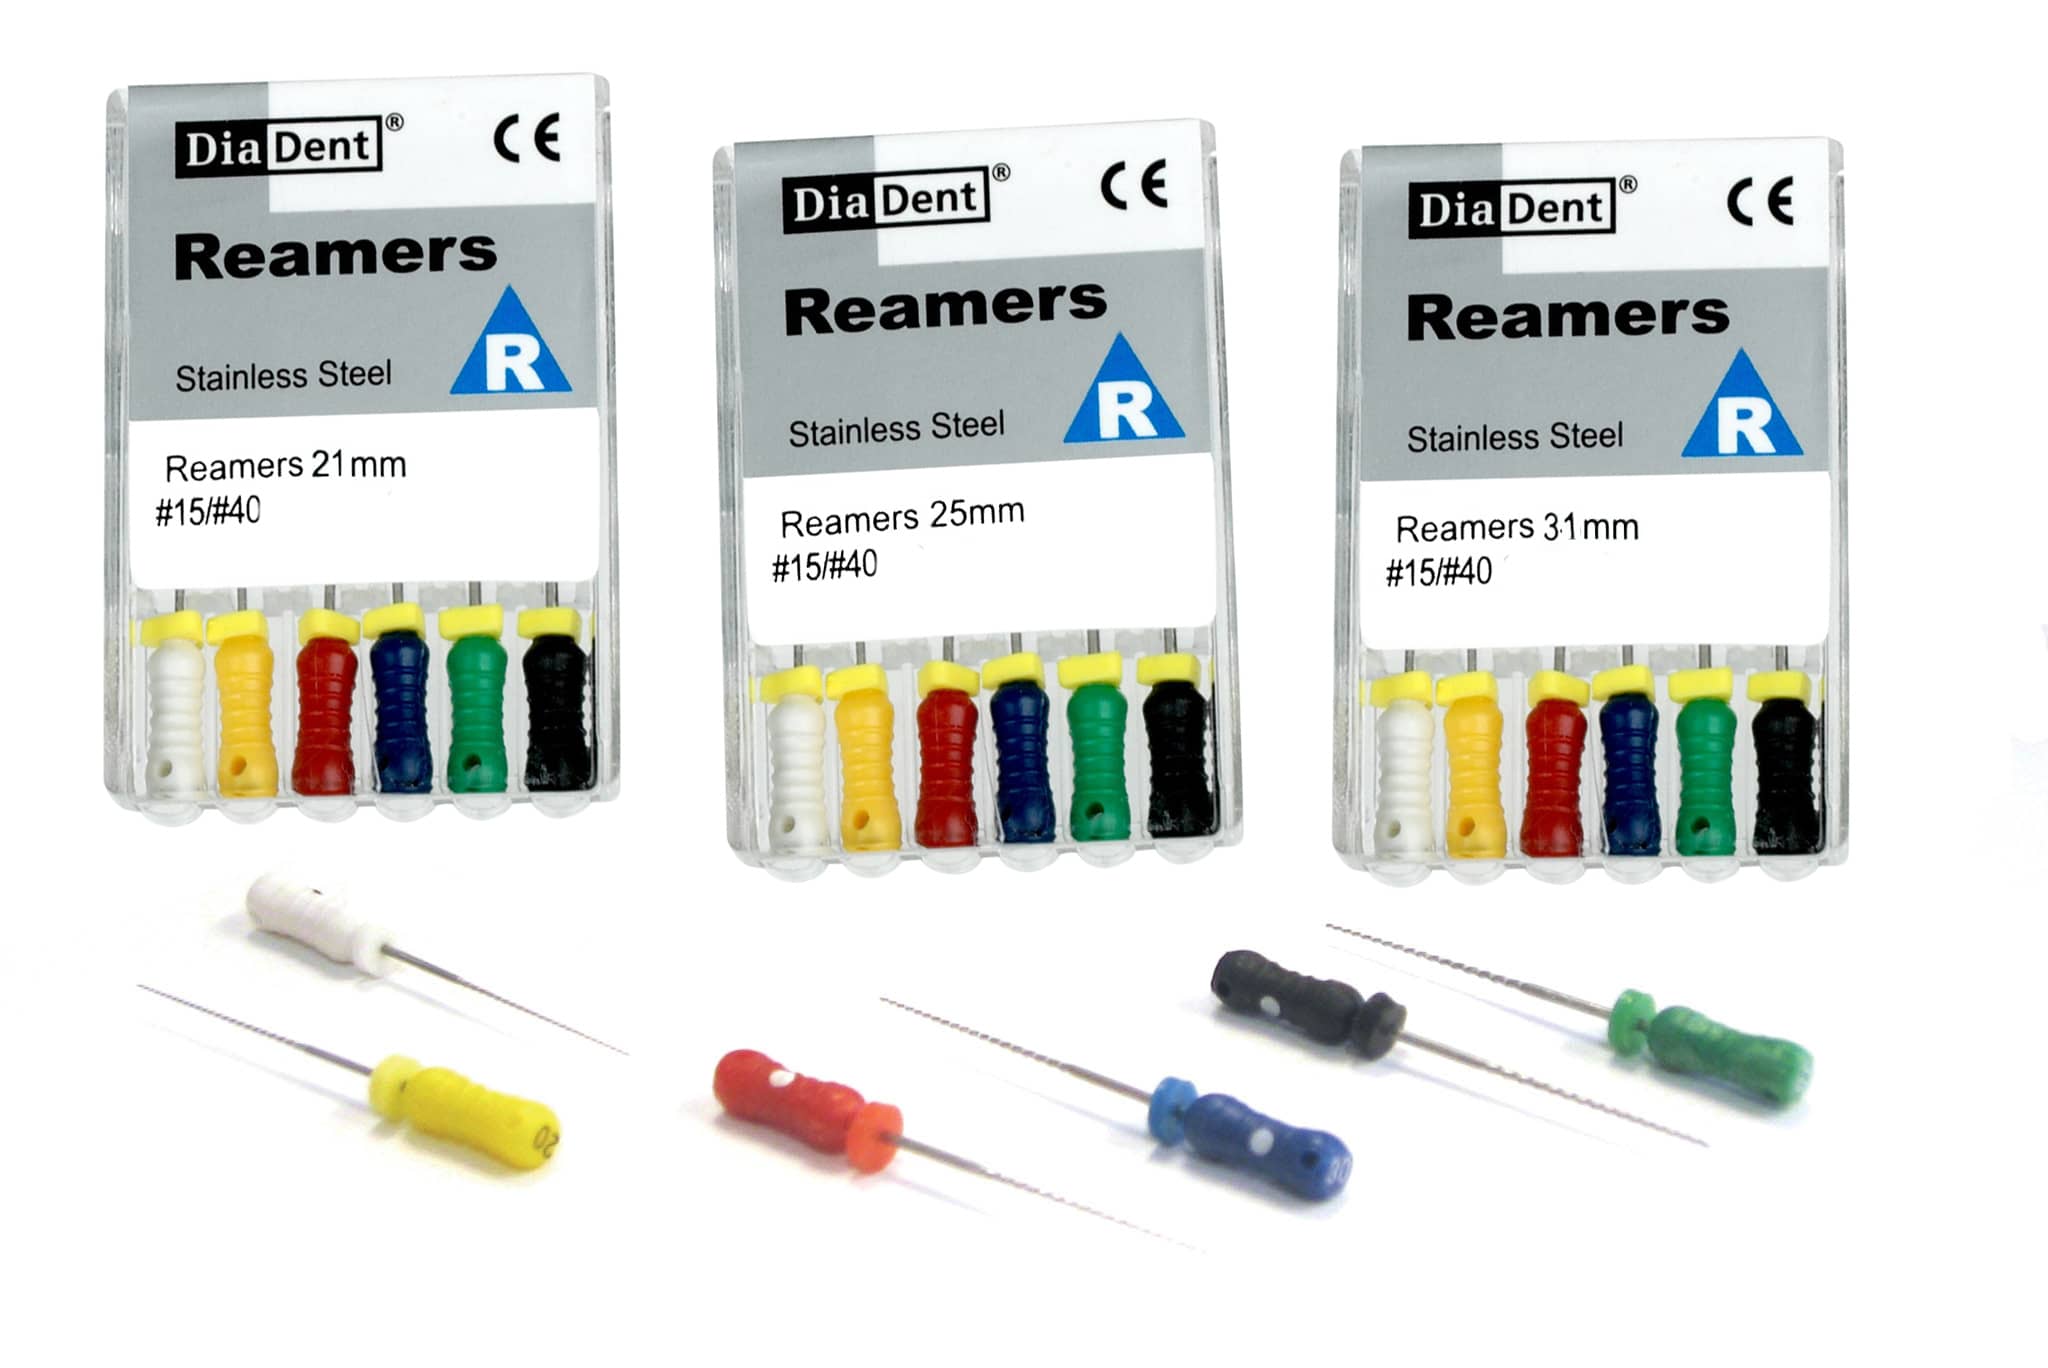 REAMERS Diadent 21mm - 15